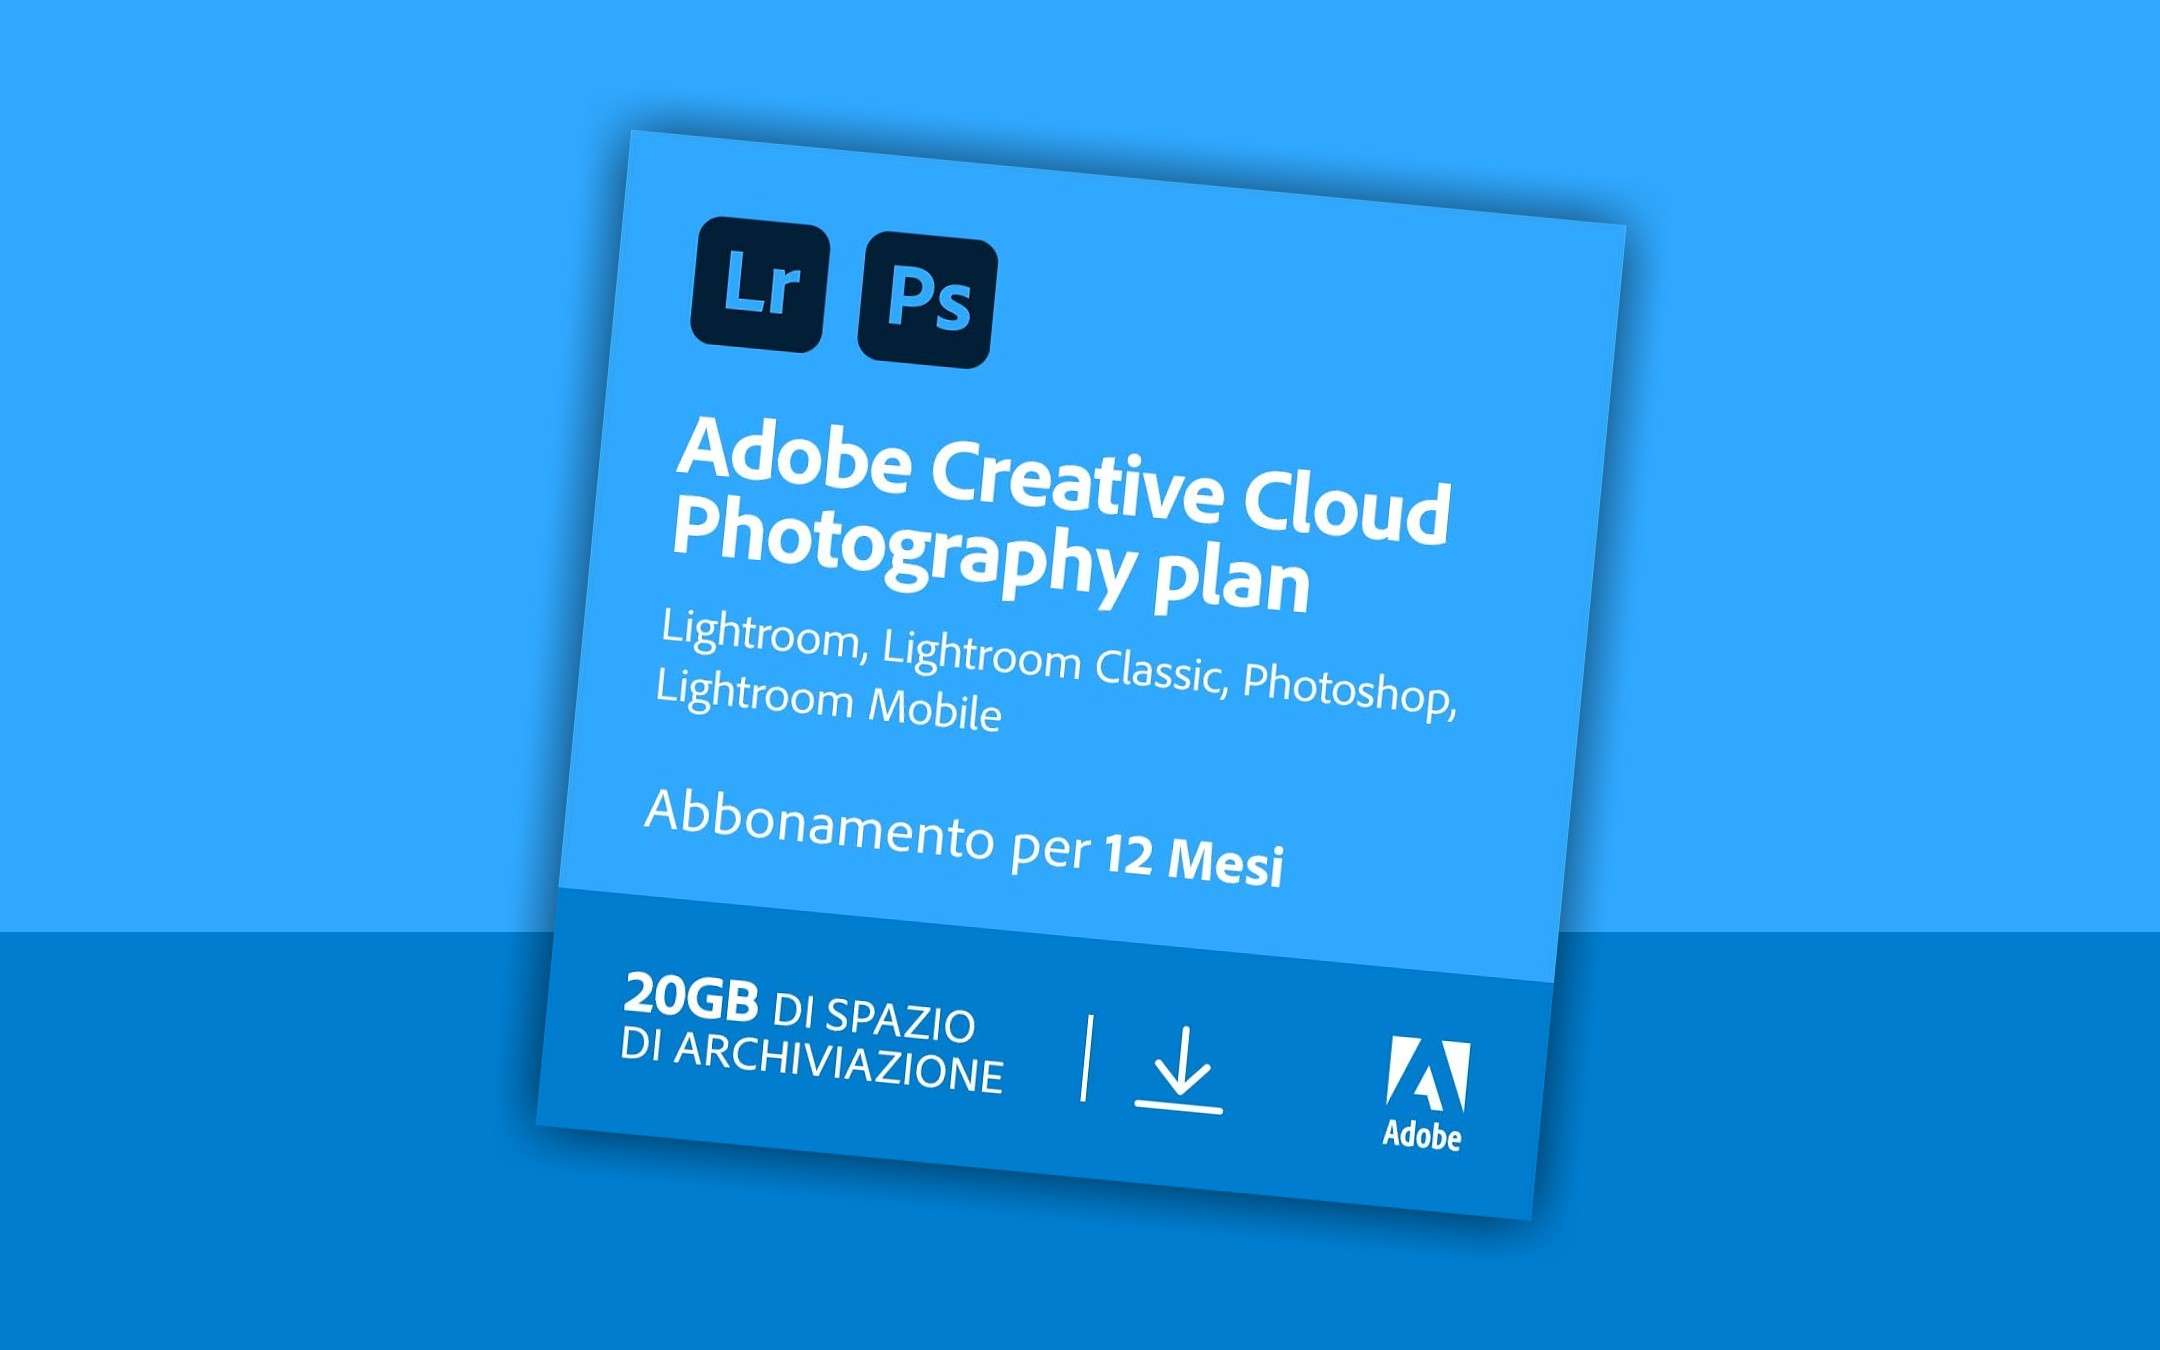 One year of Photoshop: WOW price and immediately active